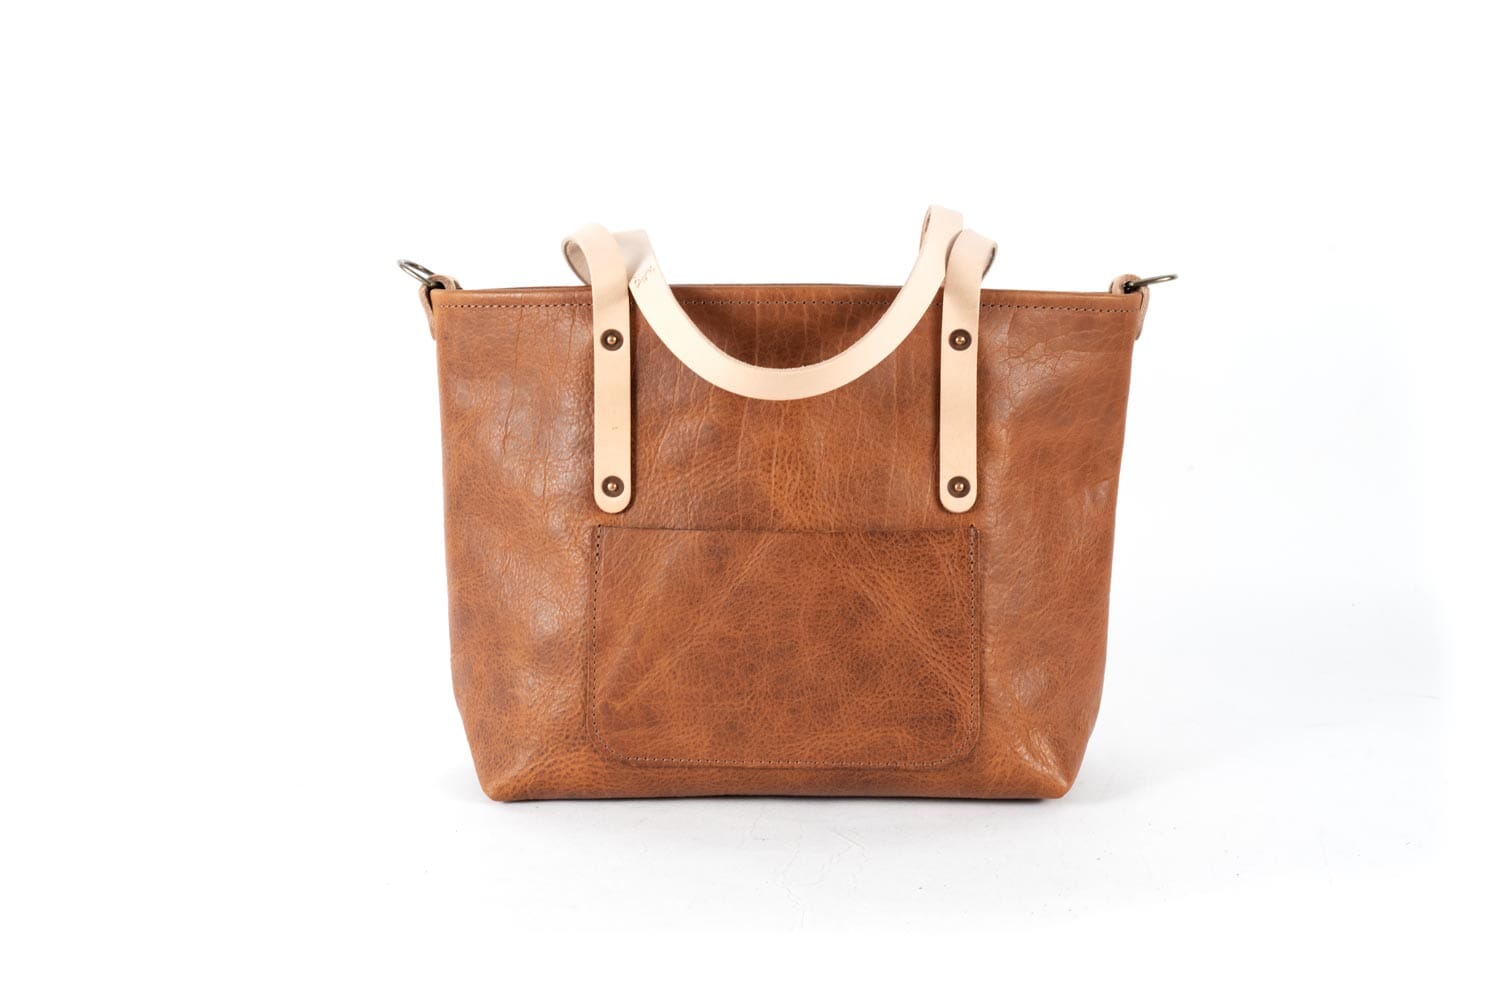 AVERY LEATHER TOTE BAG - MEDIUM - PEANUT BISON - NATURAL STRAPS - ZIPPER - FRONT POCKET - D-RINGS (RTS)